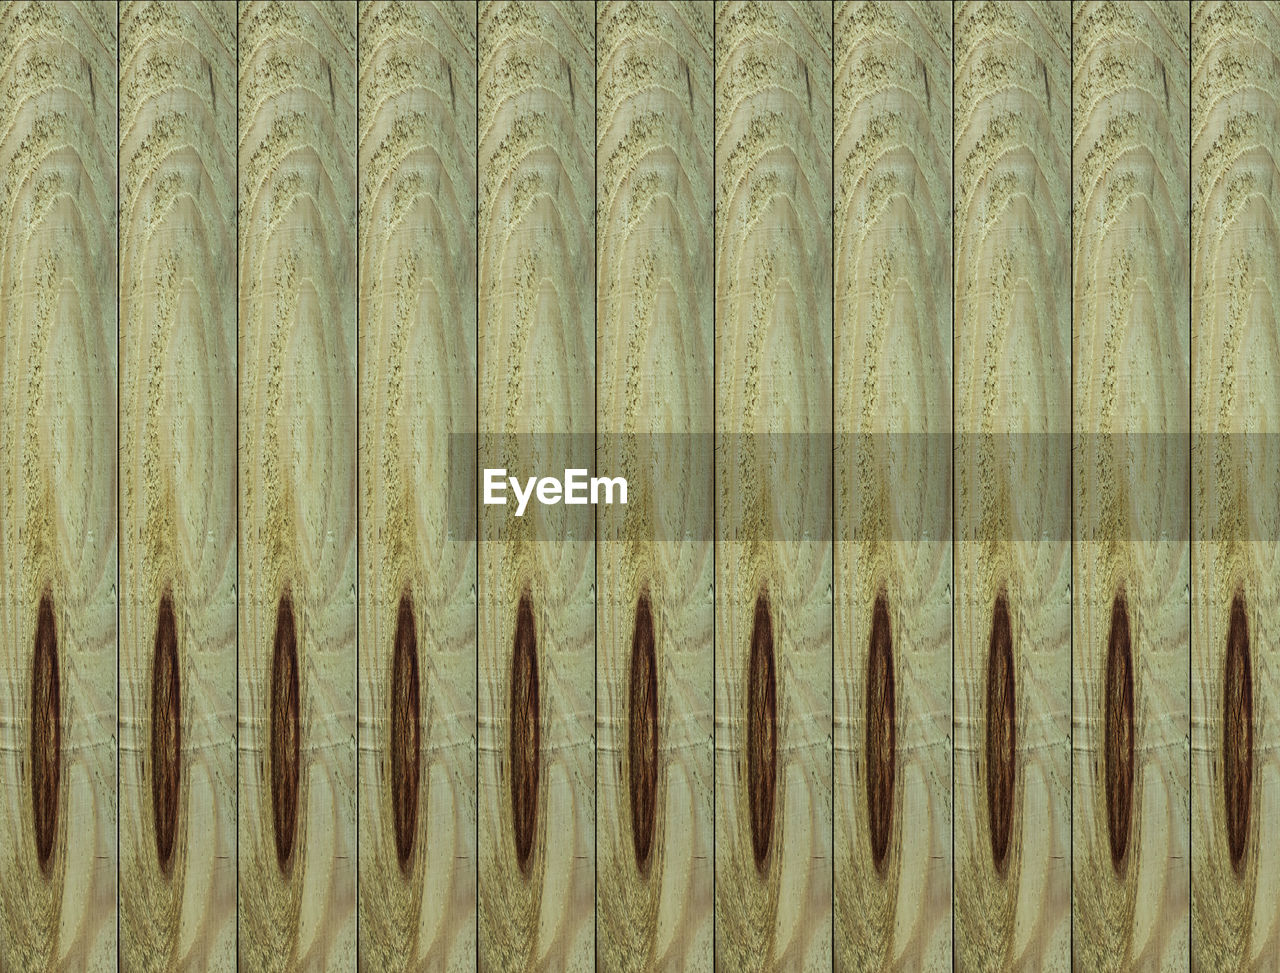 HIGH ANGLE VIEW OF CORN ON WOODEN SURFACE